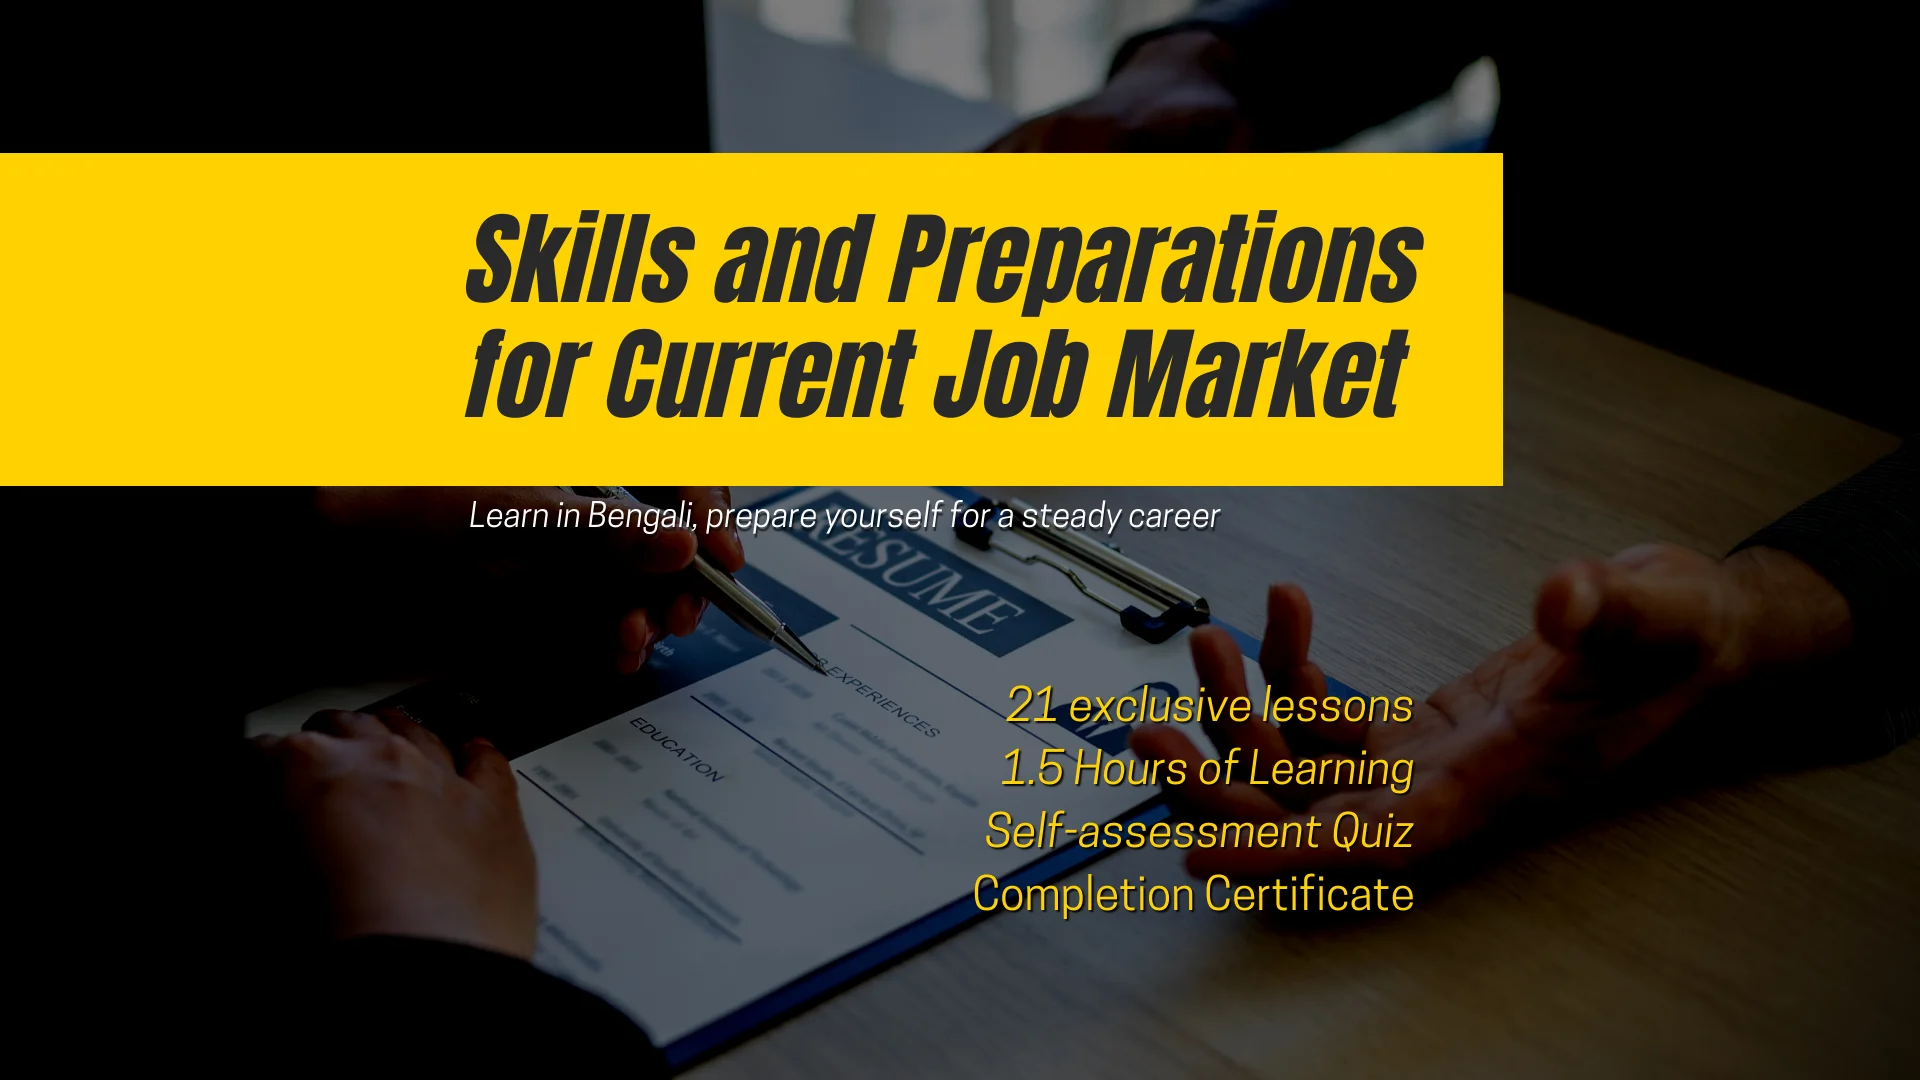 Skills and Preparation for the Current Job Market